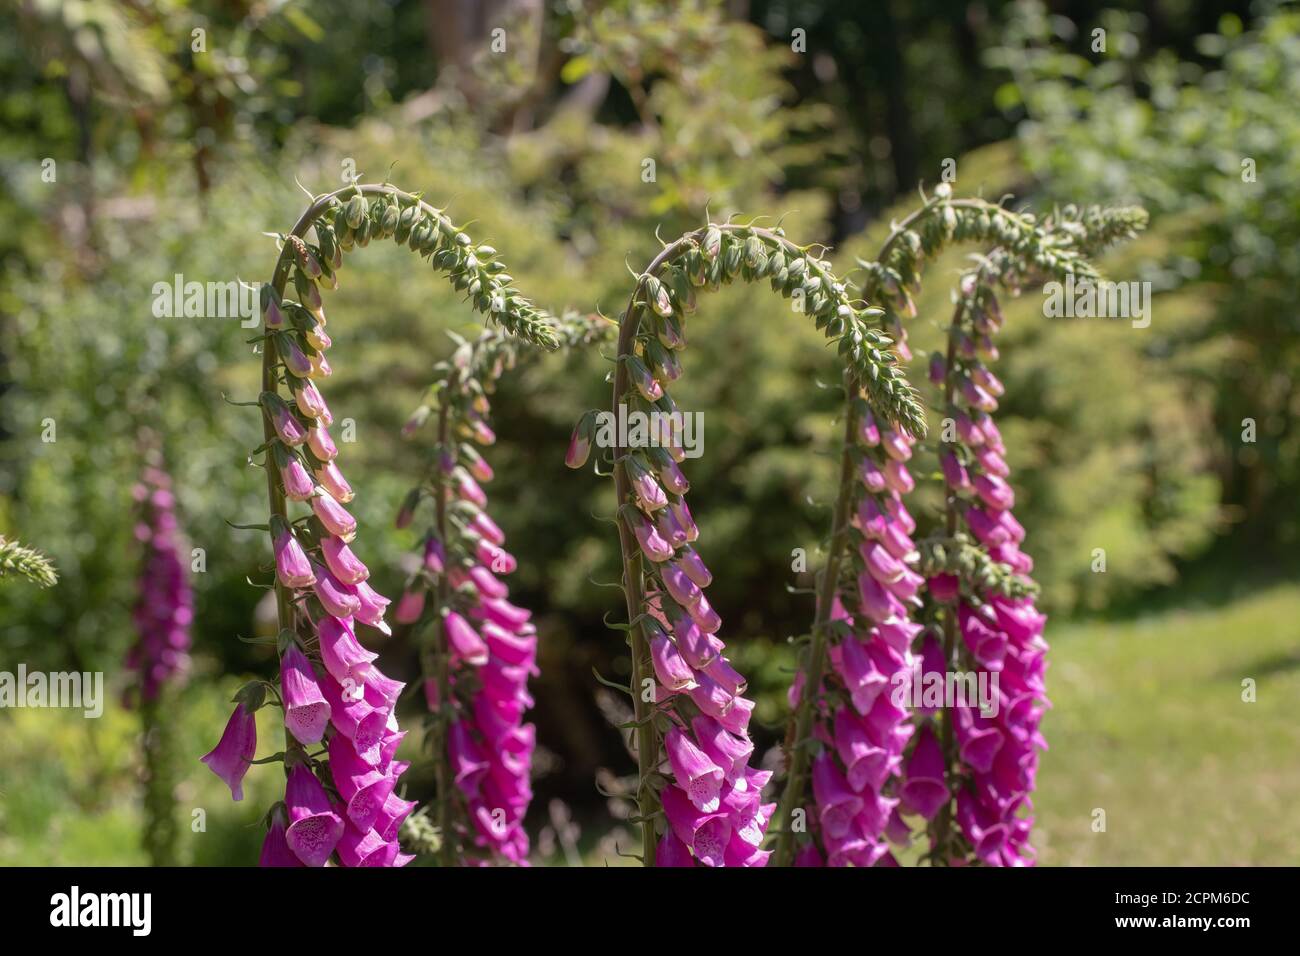 Foxglove (Digitalis purpurea). Row of multiple upright, stems, close up, heads of trumpet shaped flowers, on single stems. Drooping, but erecting, upp Stock Photo